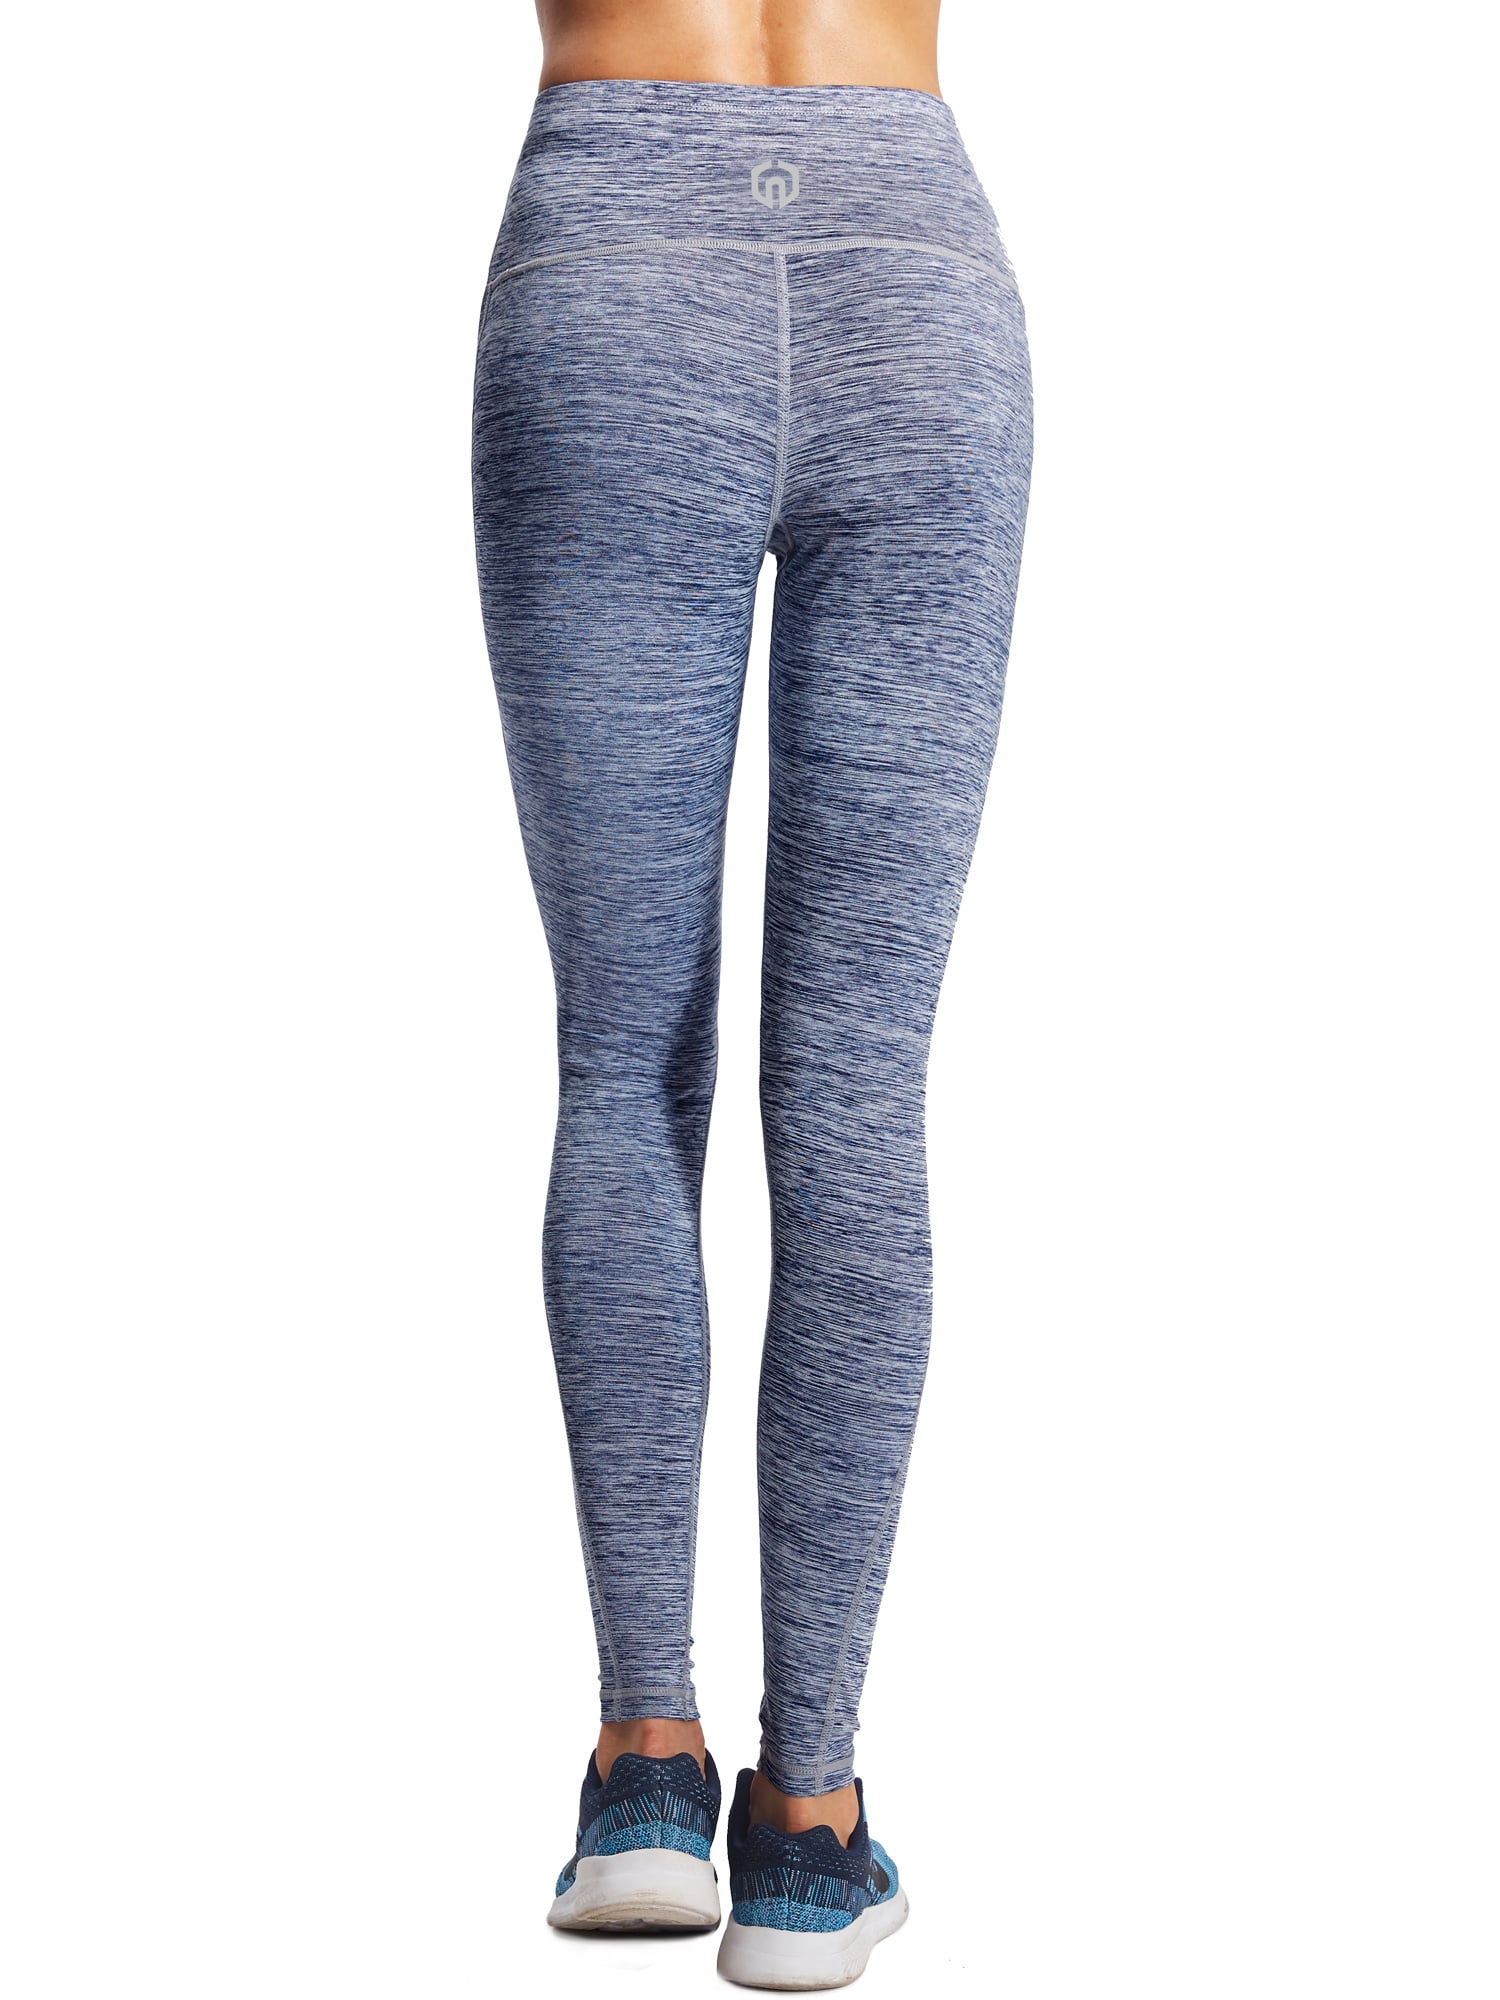 LZD NELEUS High Waist Running Workout Leggings for Yoga with